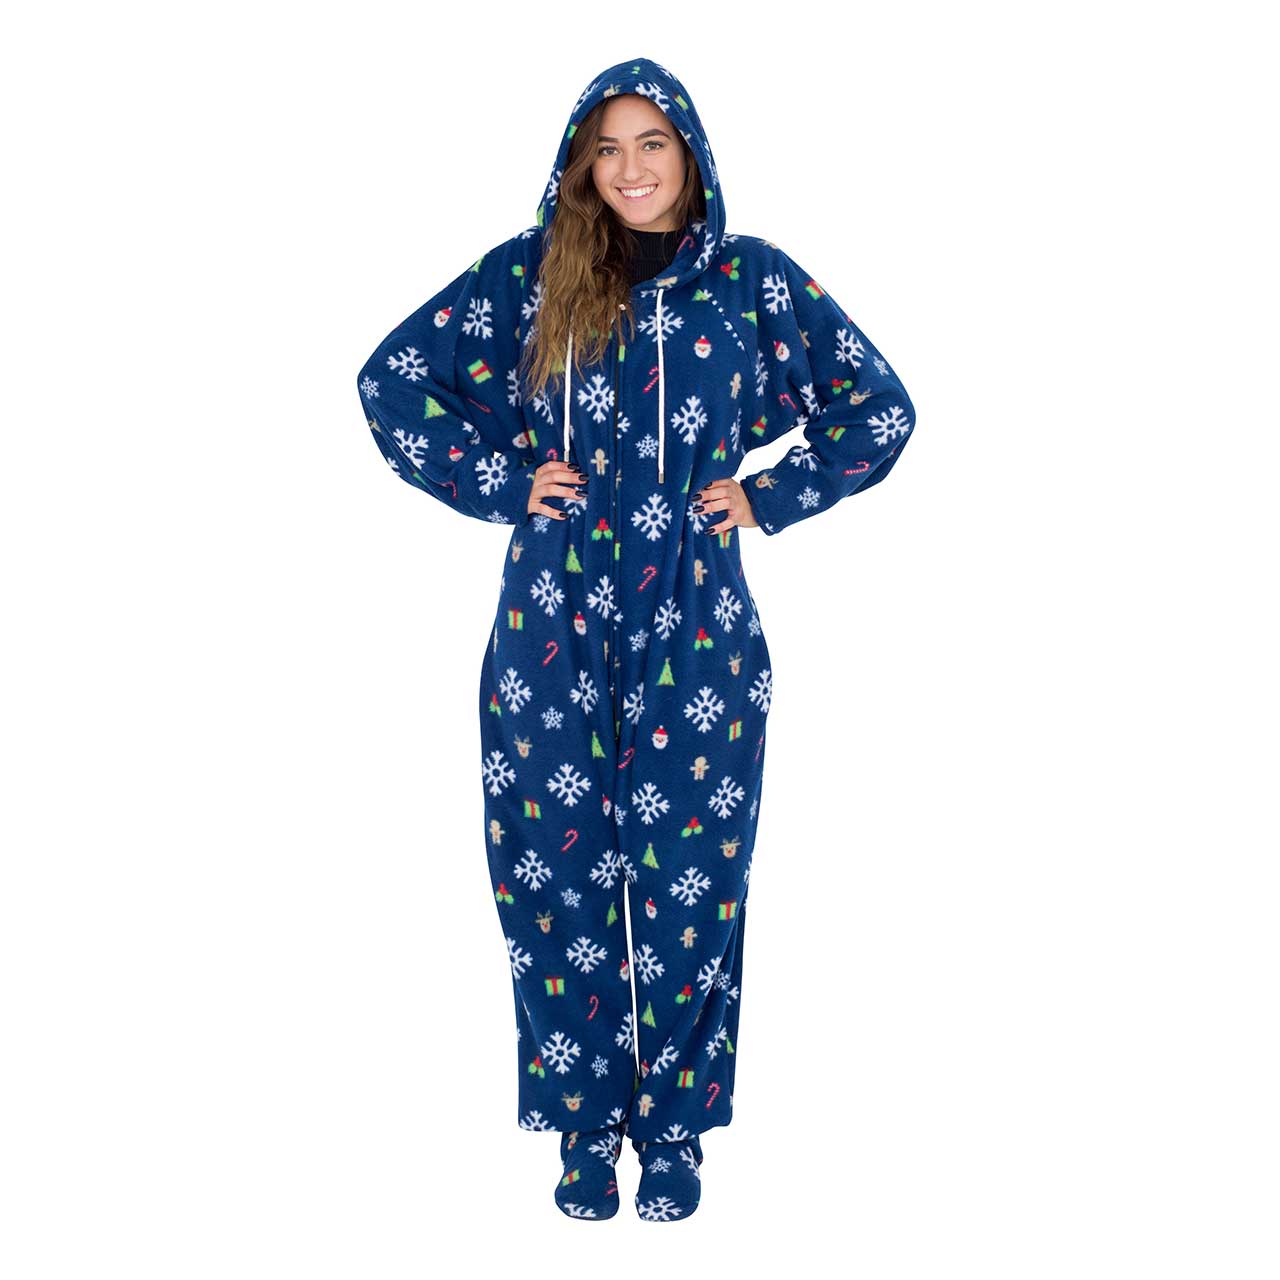 Snowflakes and Reindeer Navy Ugly Christmas Pajama Suit with Hood,New Products : uglyschristmassweater.com